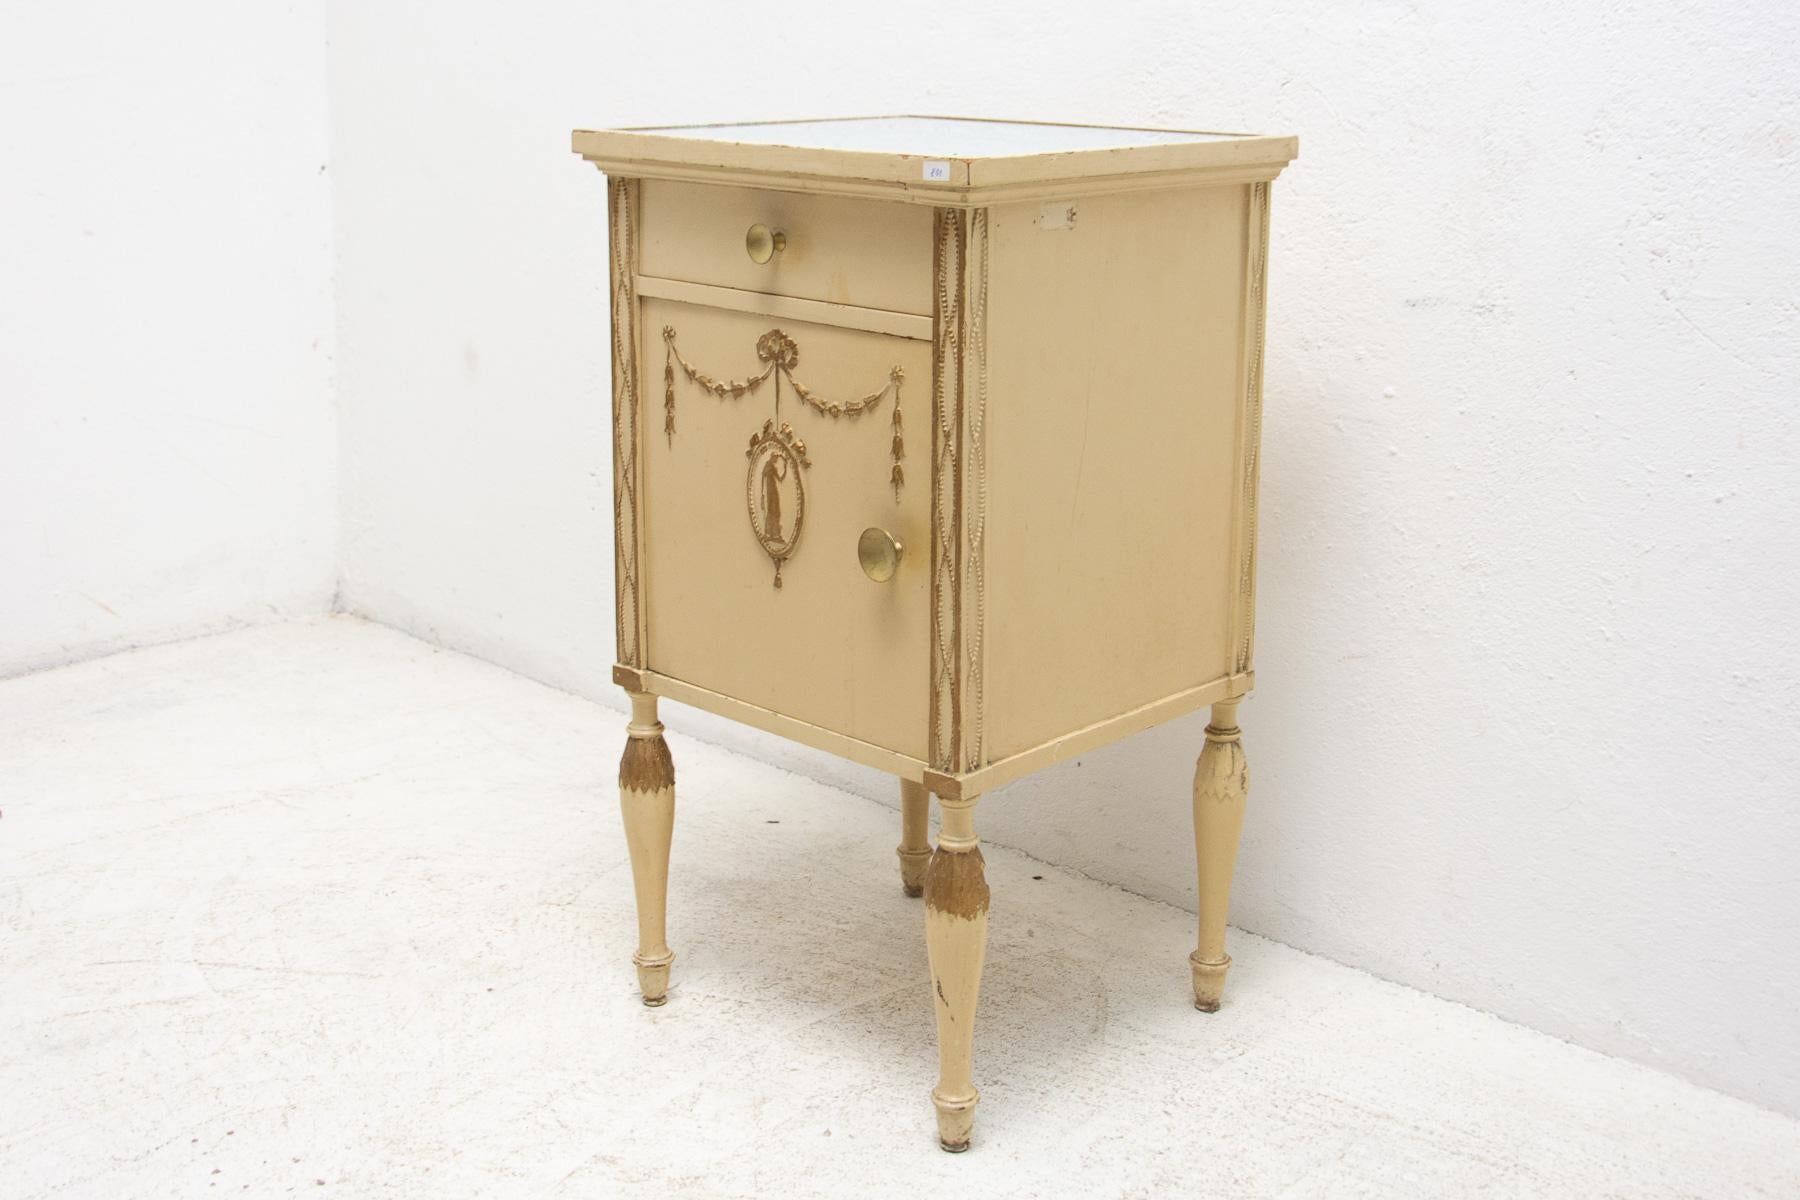 This bedside table was part of a complete enchanting bedroom furniture set by Portois and Fix, originally manufactured for the presidential suite at the Imperial Hotel in Carlsbad.

The original condition of the furniture was unprofessionally